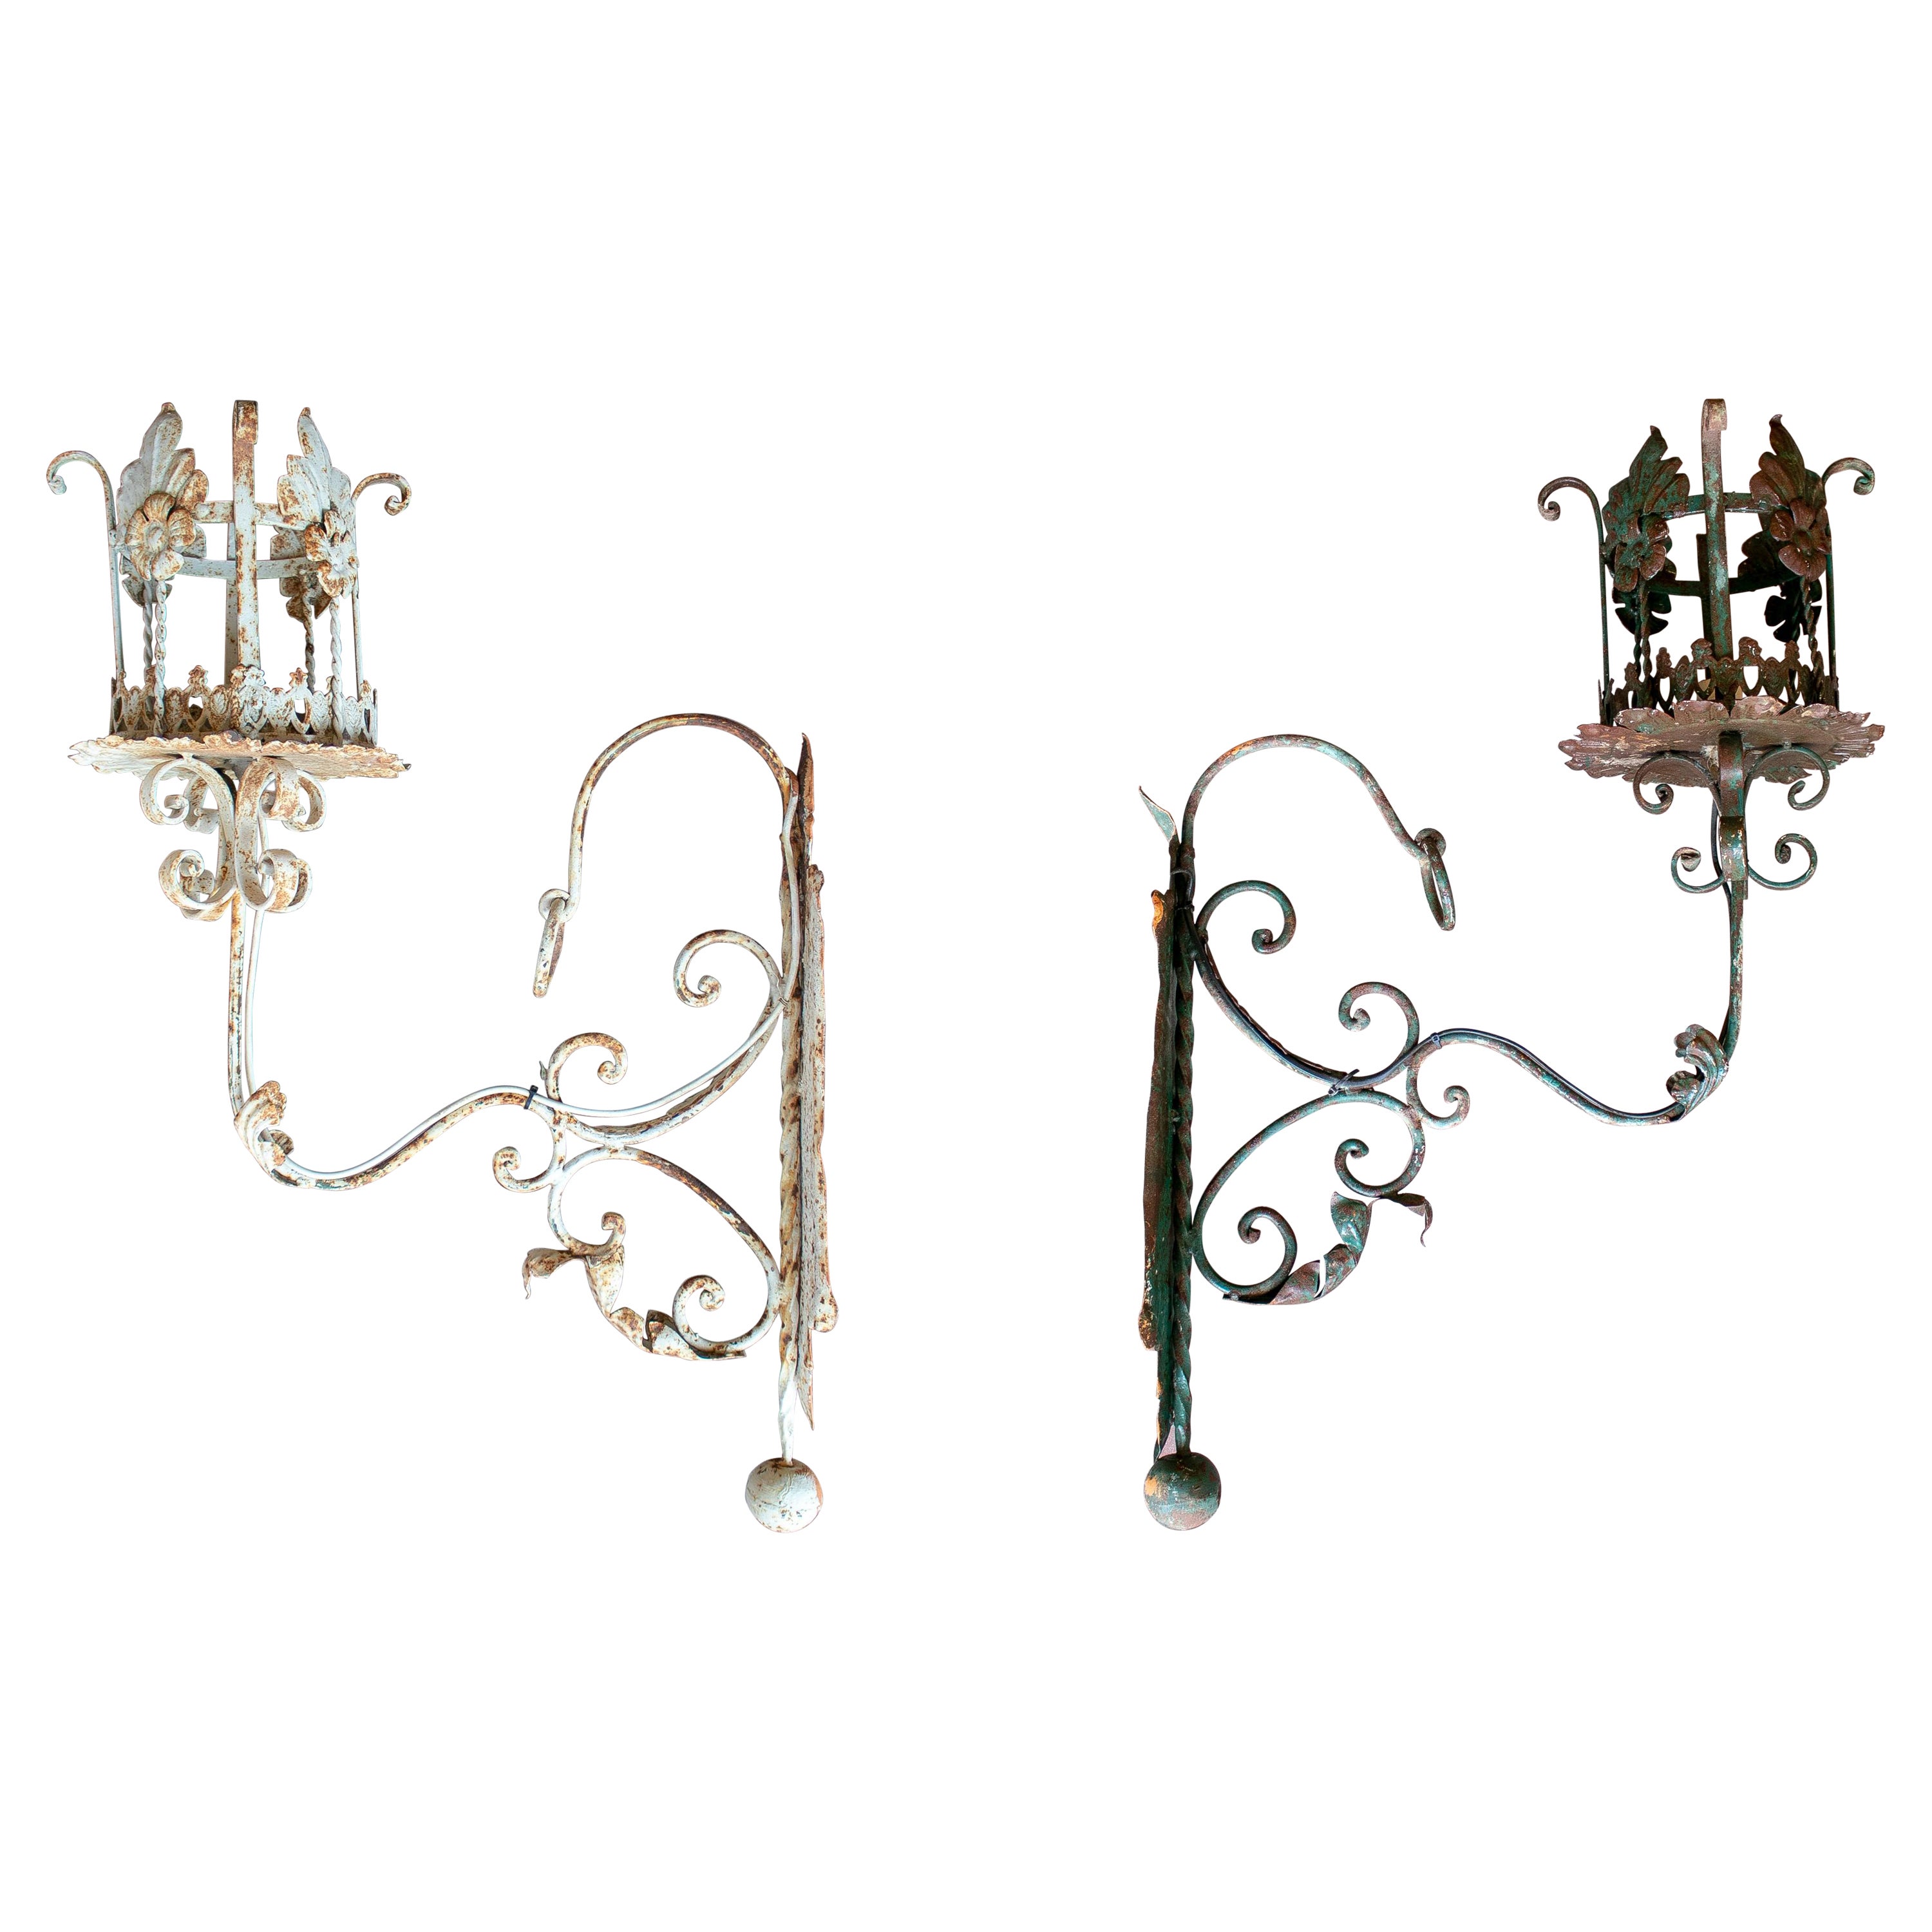 Pair of 1950s Spanish Wrought Iron Wall Lamp Lanterns For Sale